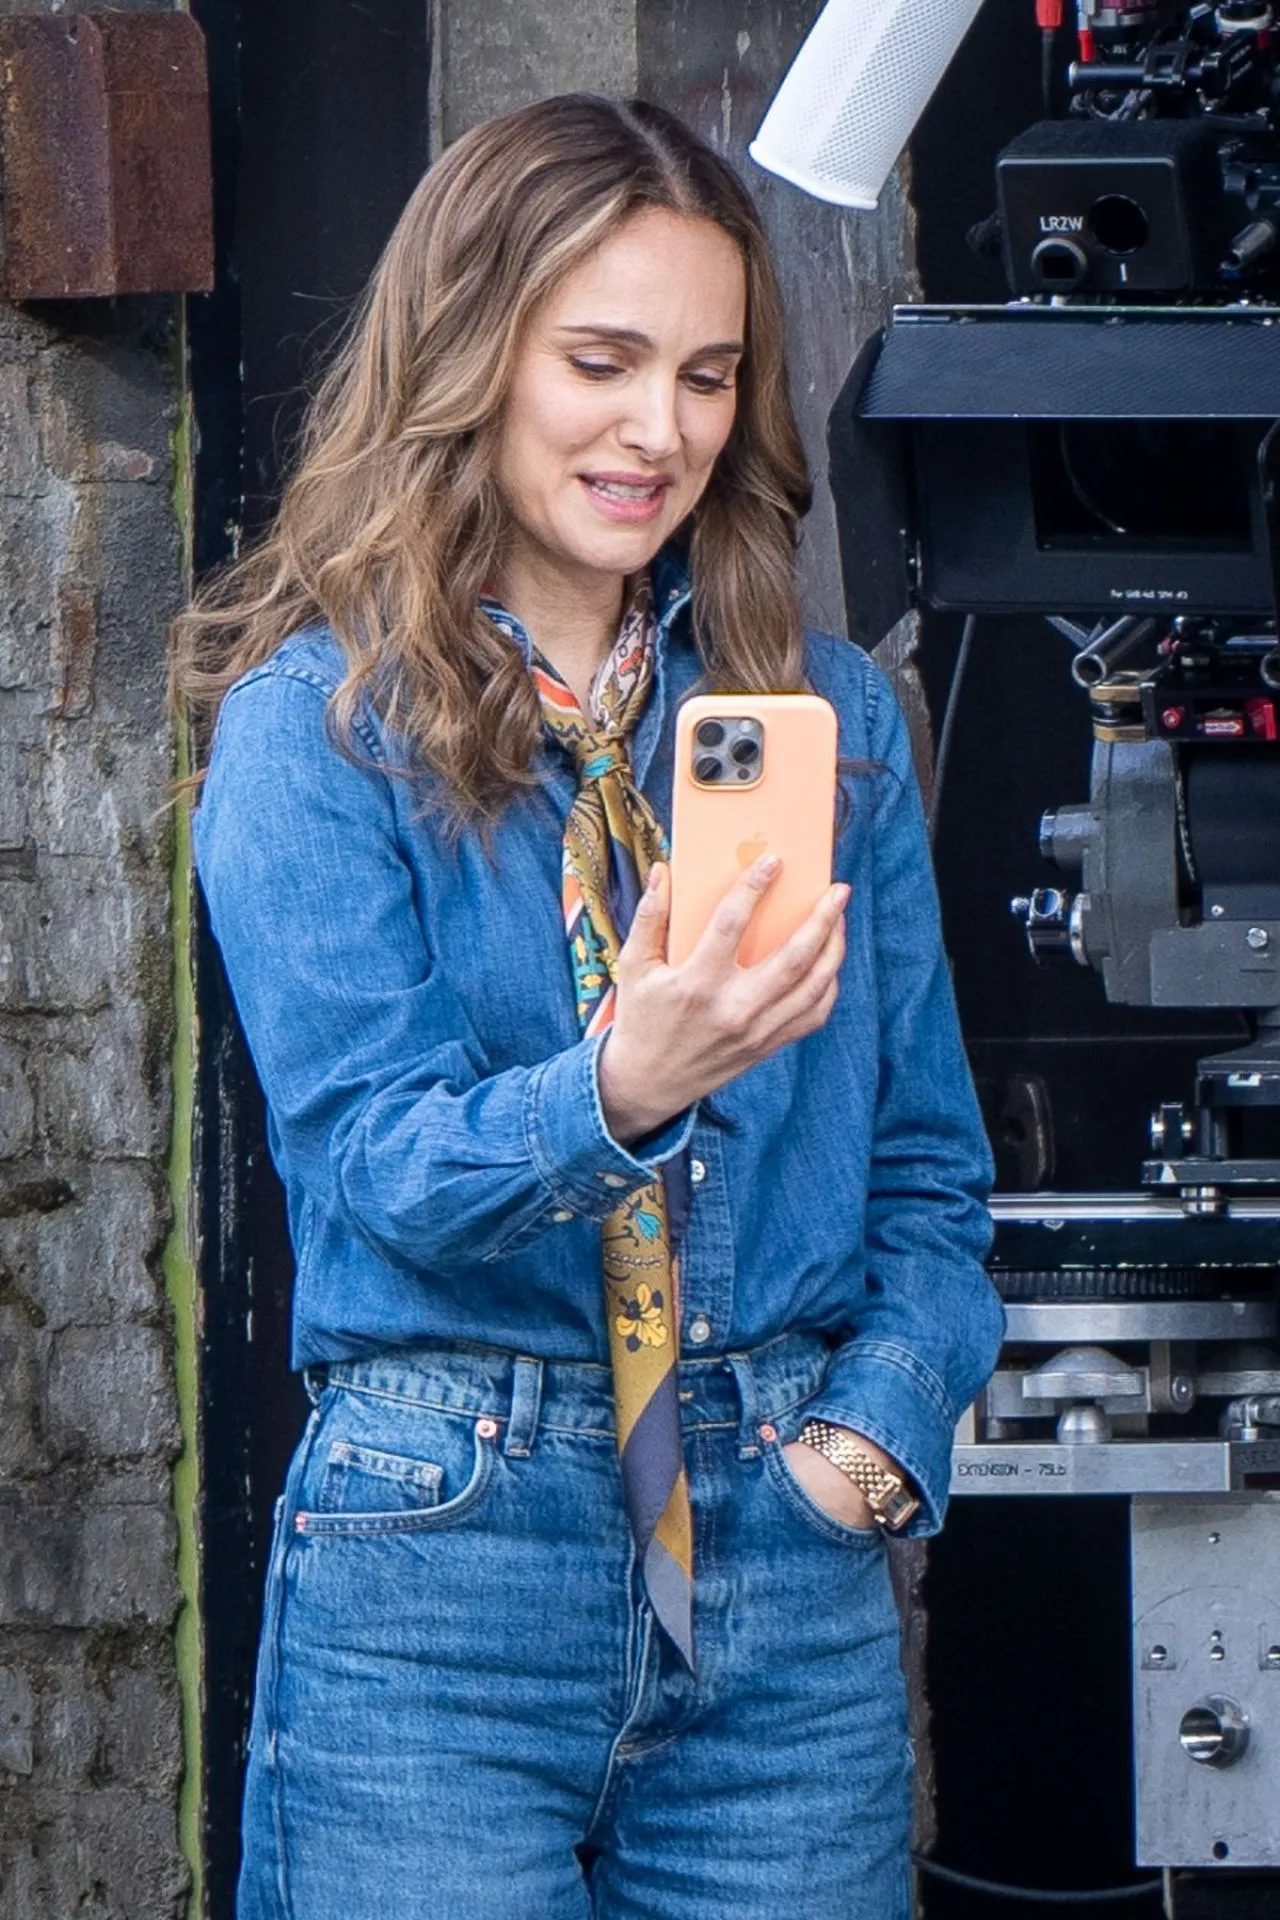 NATALIE PORTMAN ON THE SET OF FOUNTAIN OF YOUTH IN LONDON4